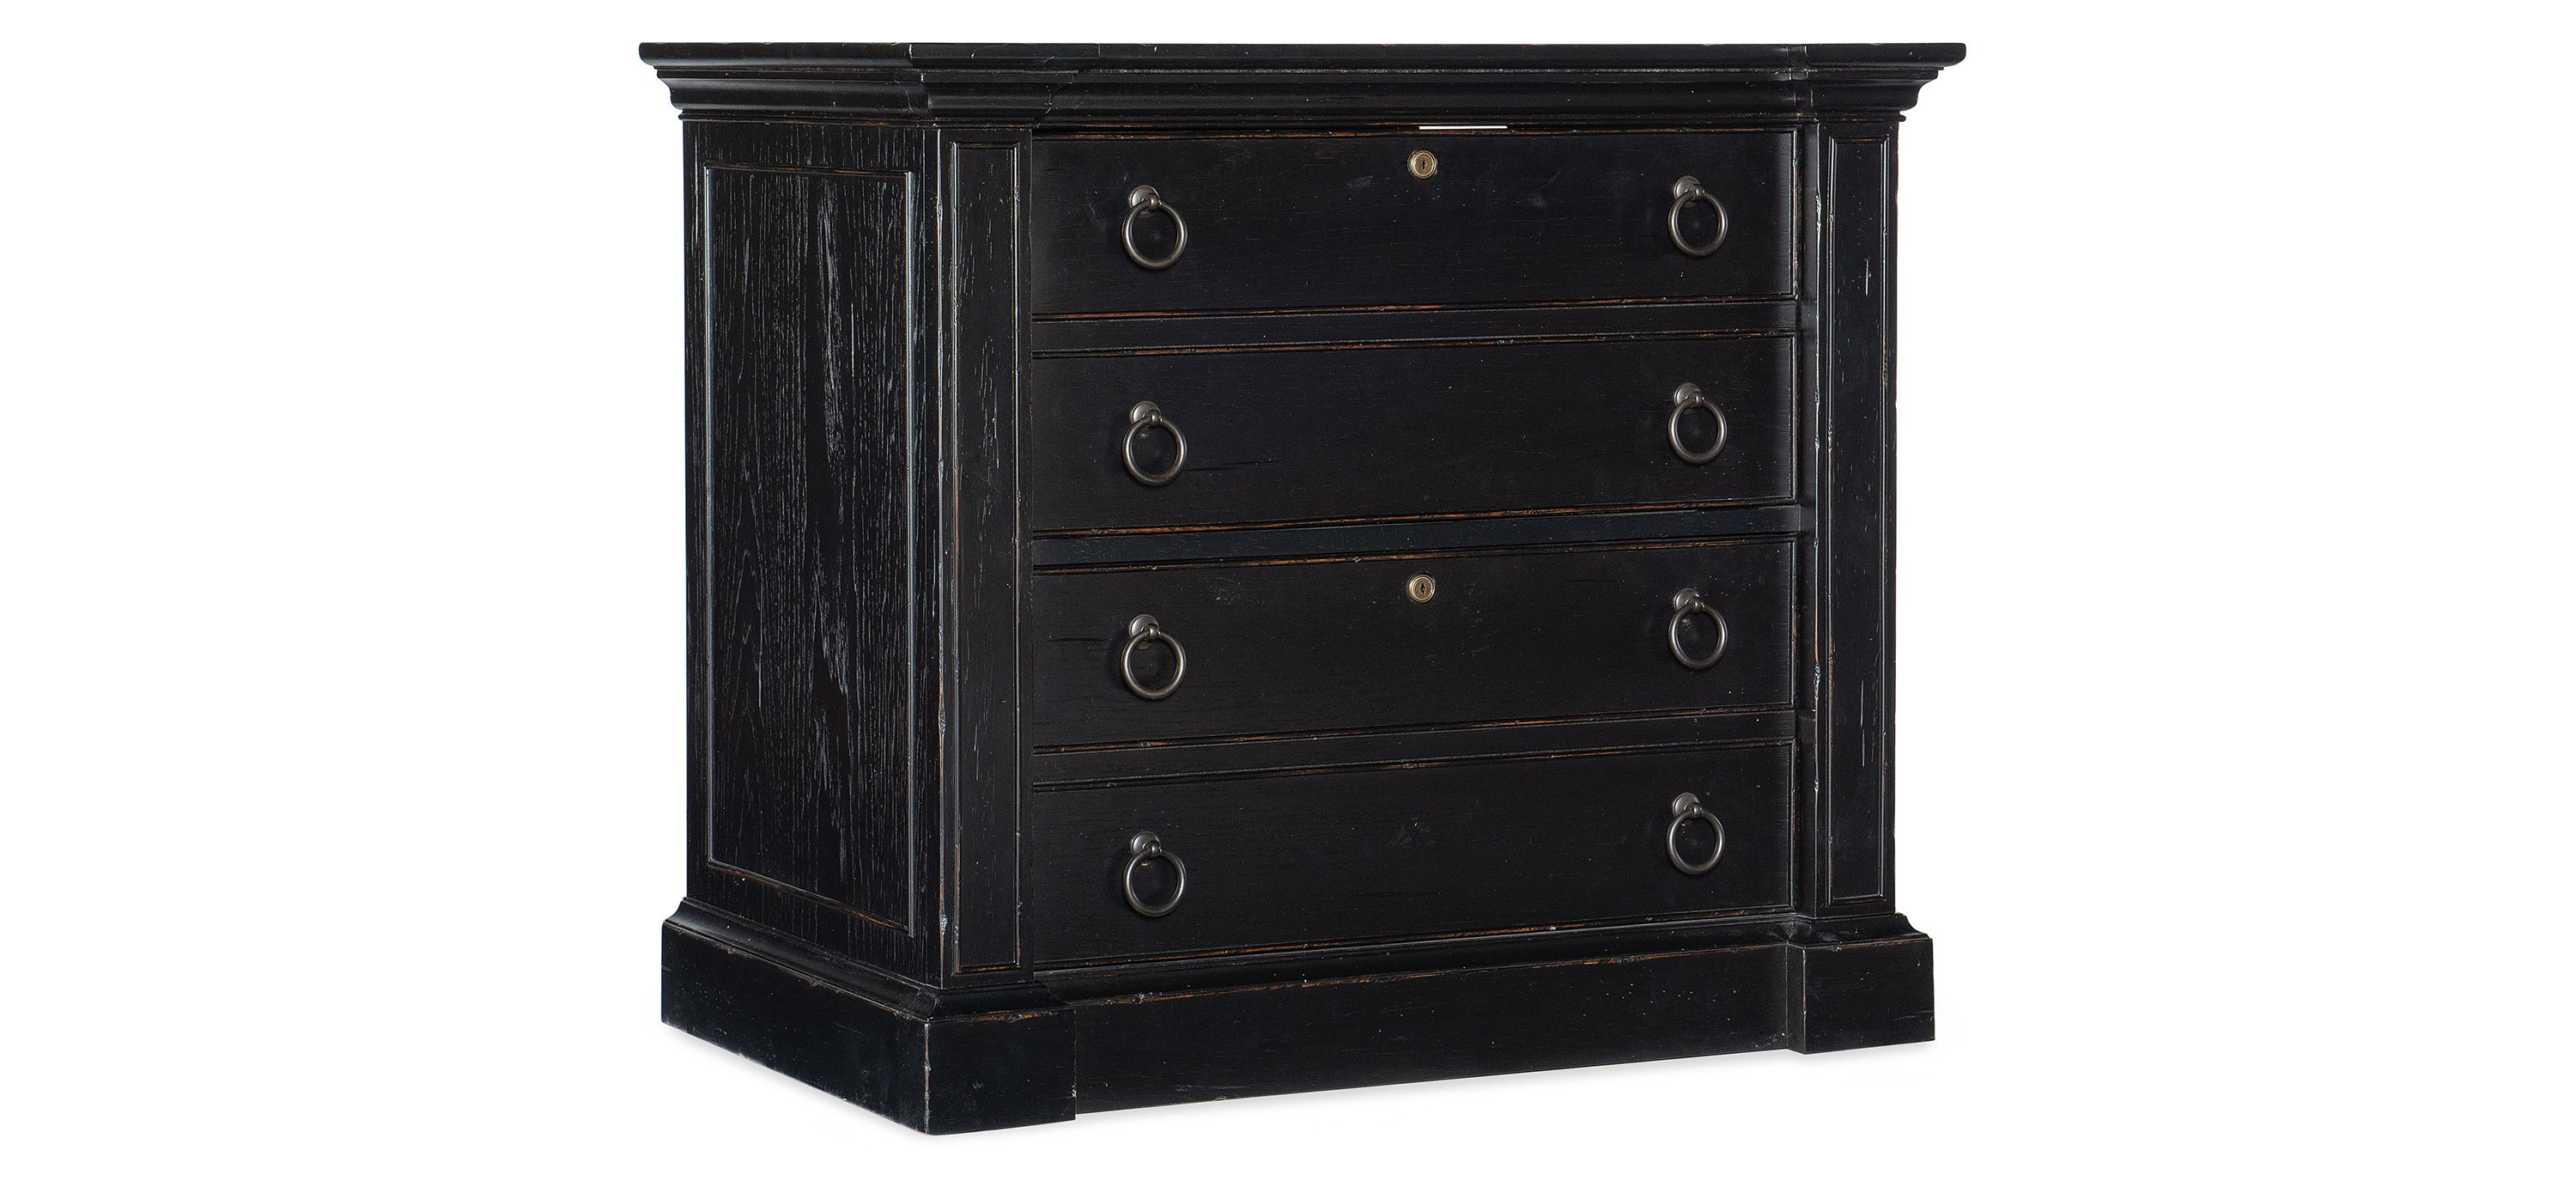 Bristowe Lateral File Cabinet